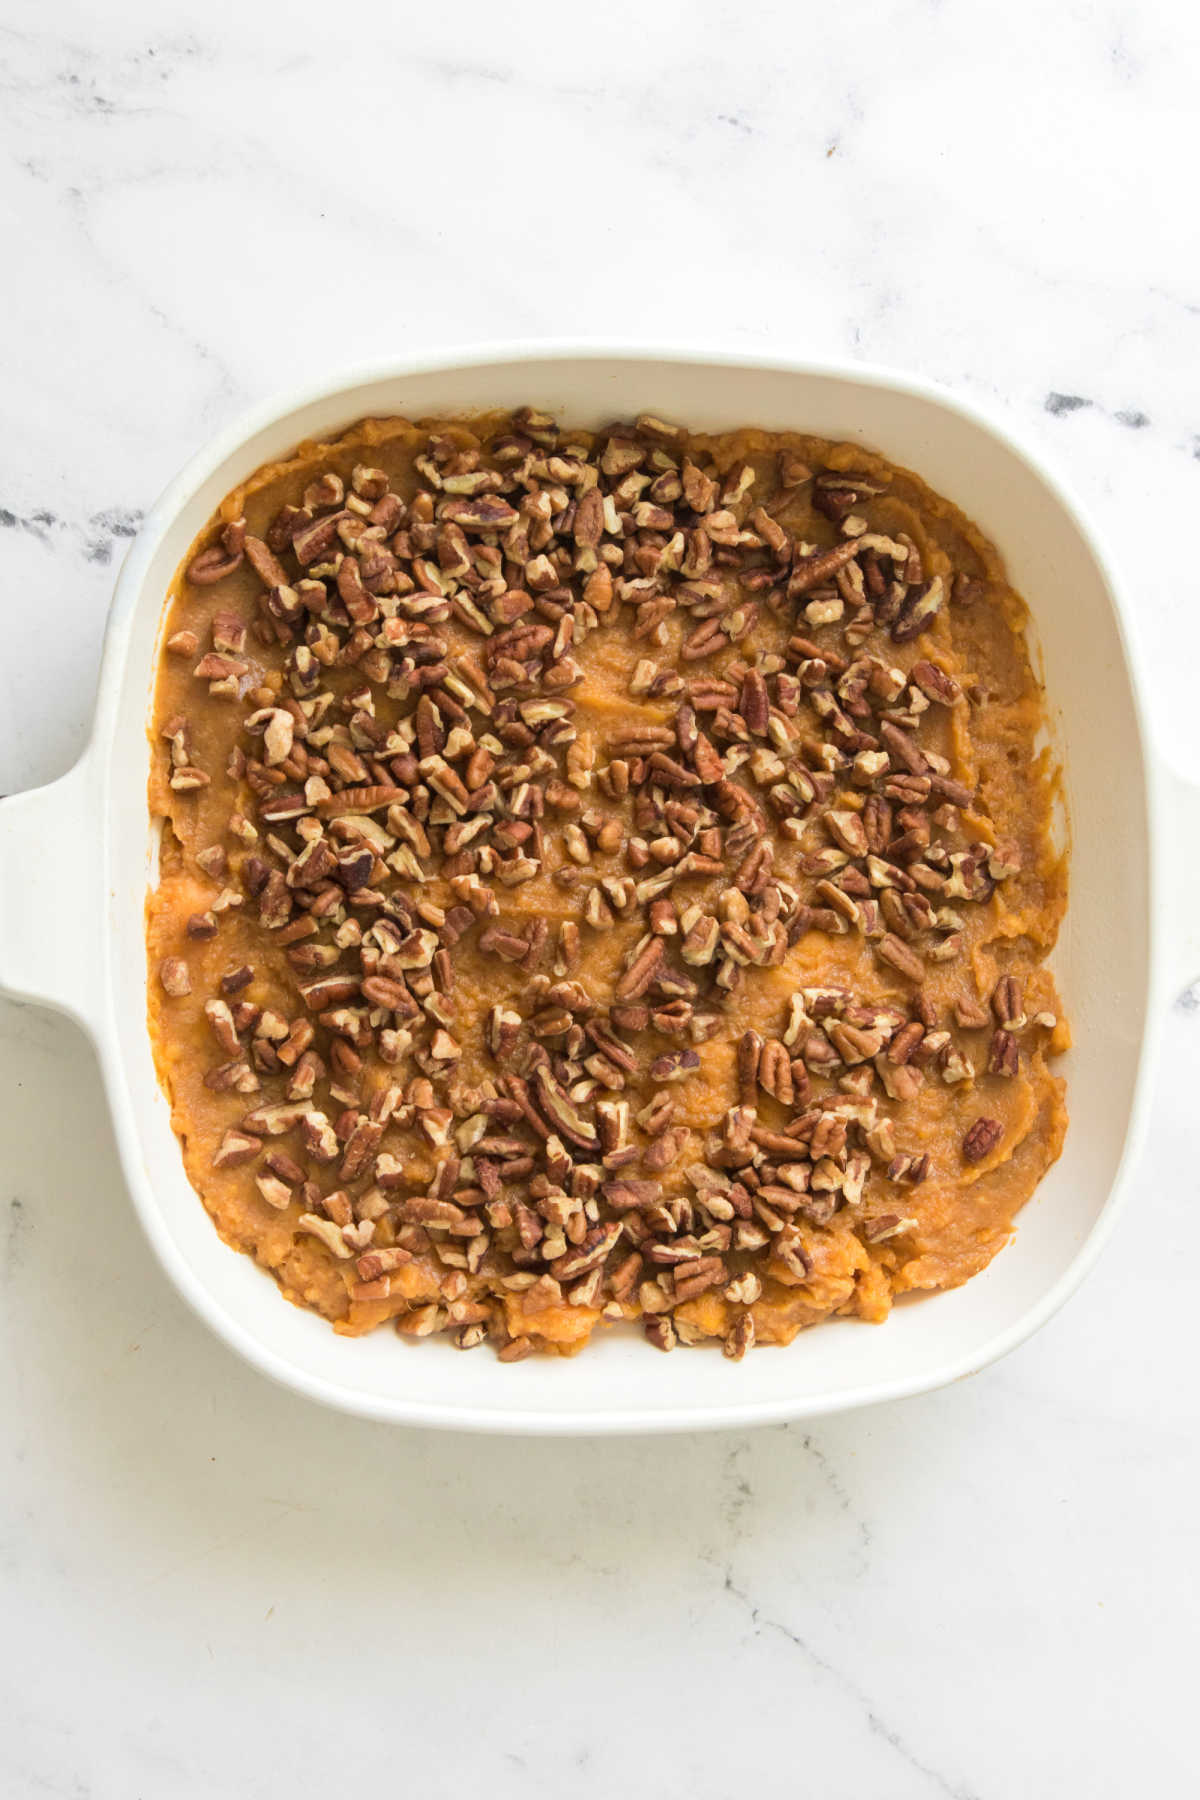 Casserole dish filled with mashed sweet potatoes and sprinkled with pecans.